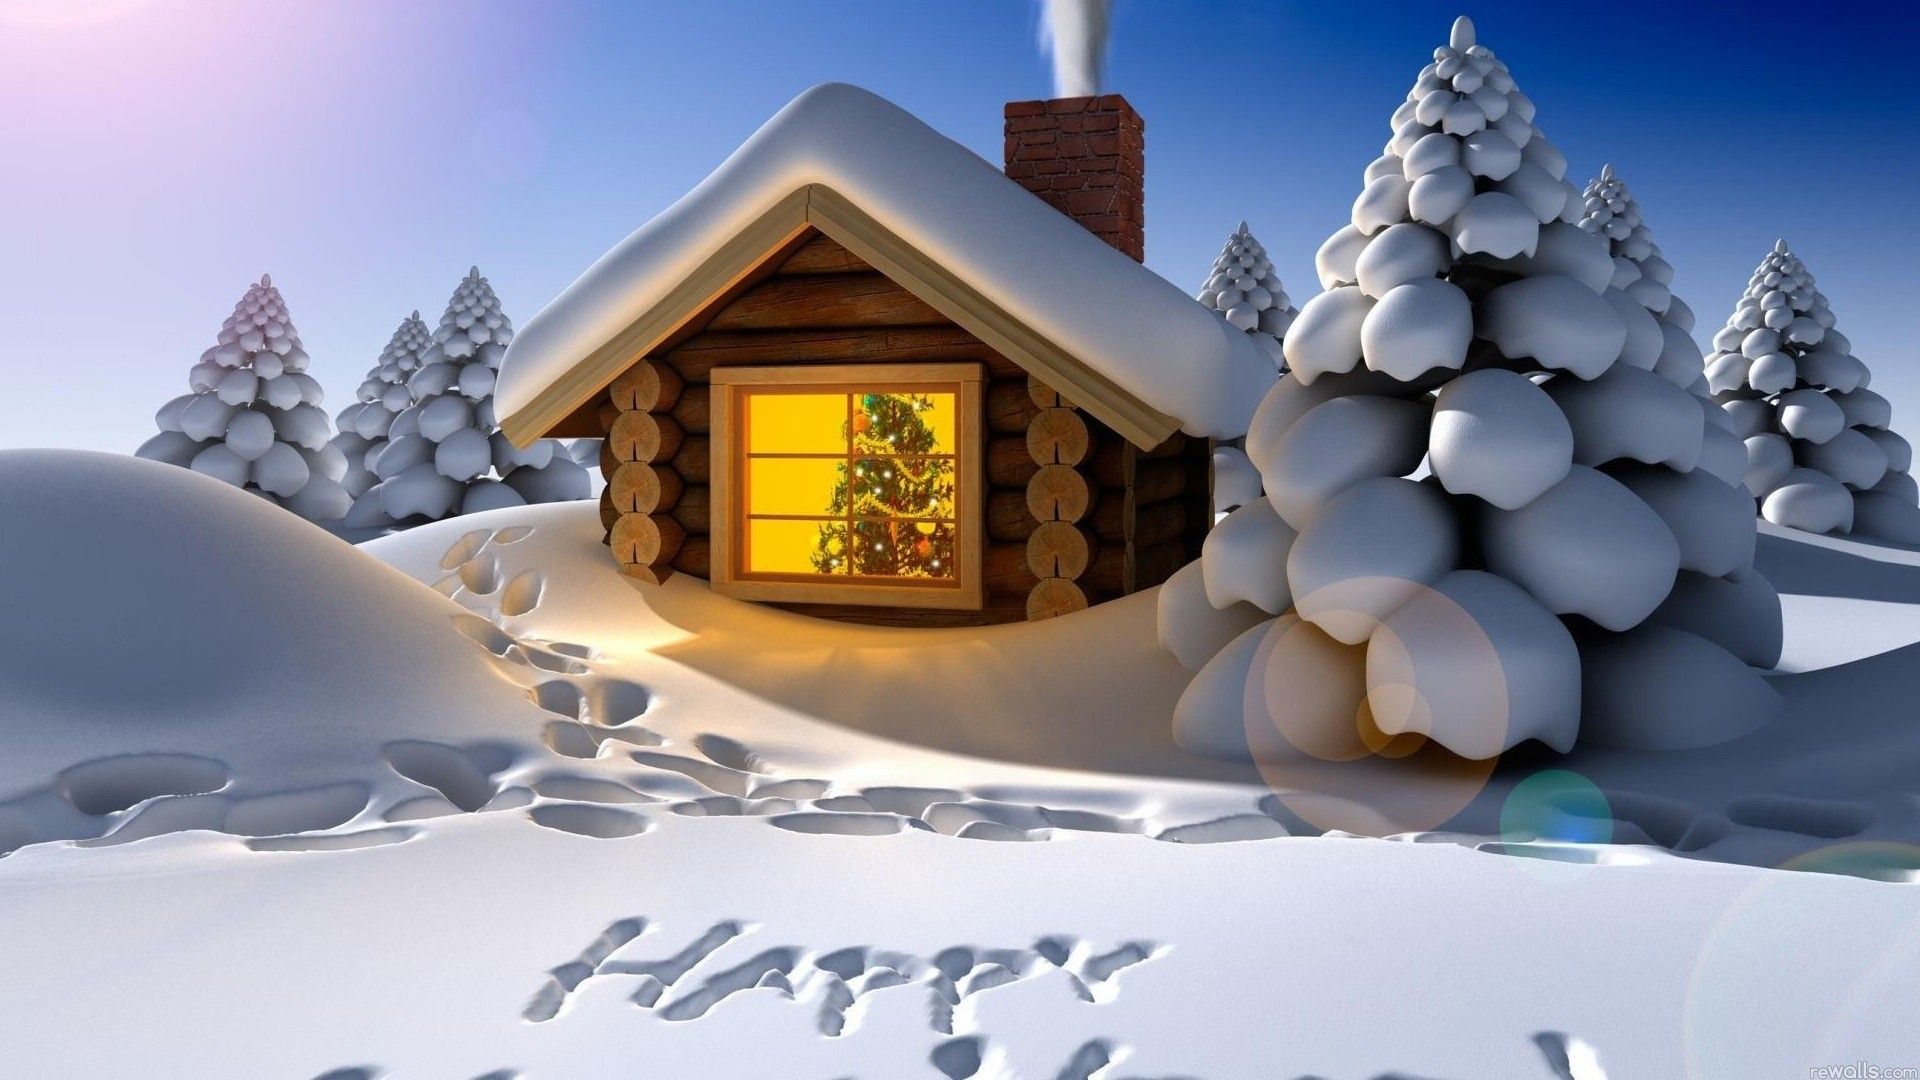 Cabin in the snow wallpaper. Happy new year wallpaper, Christmas facebook cover, New year wallpaper